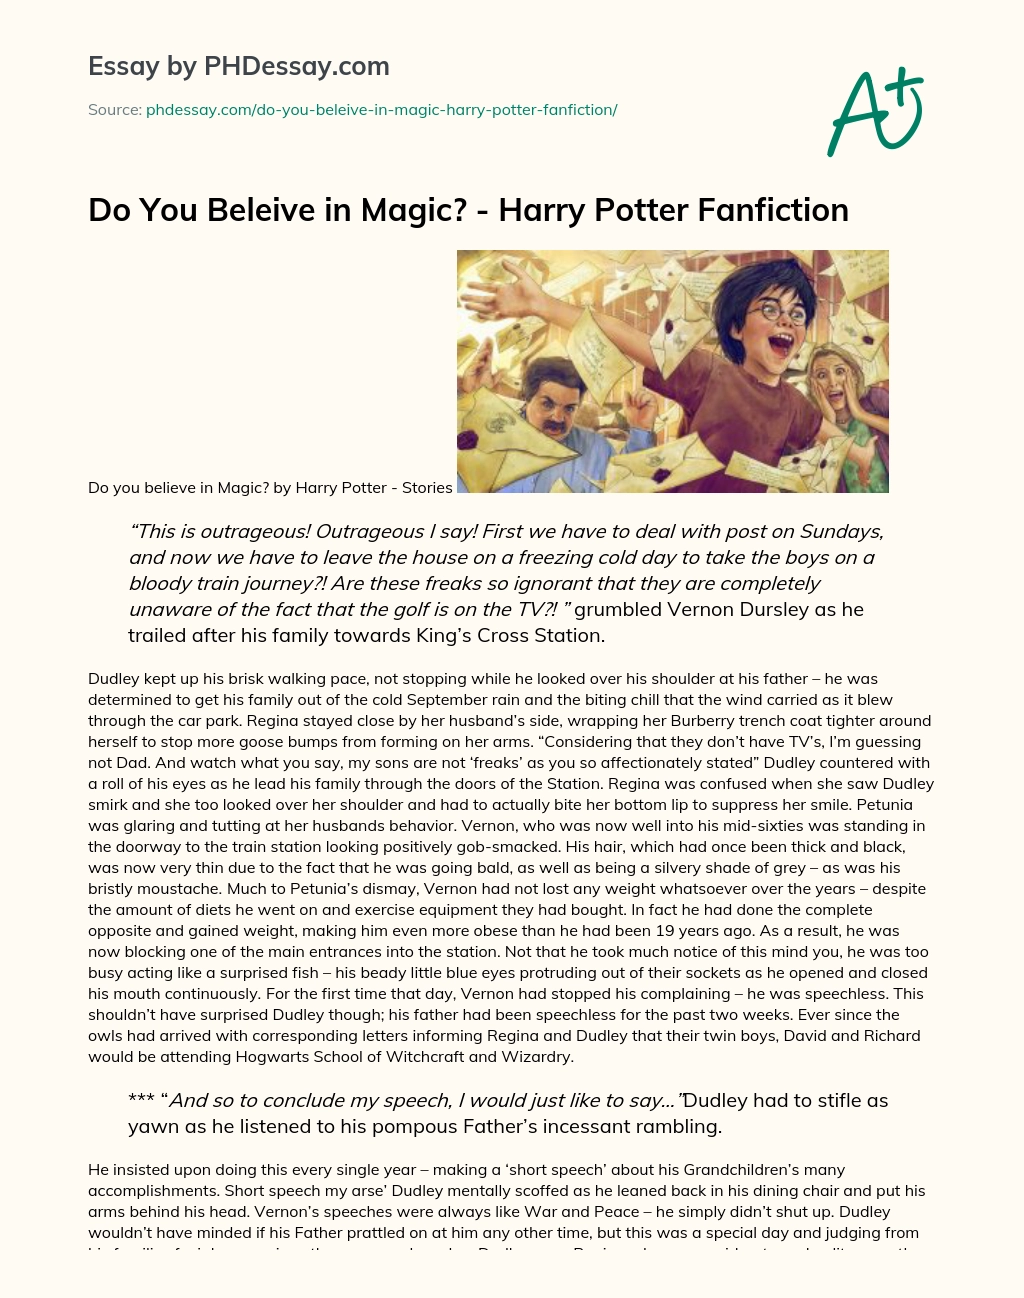 Do You Beleive in Magic? – Harry Potter Fanfiction essay